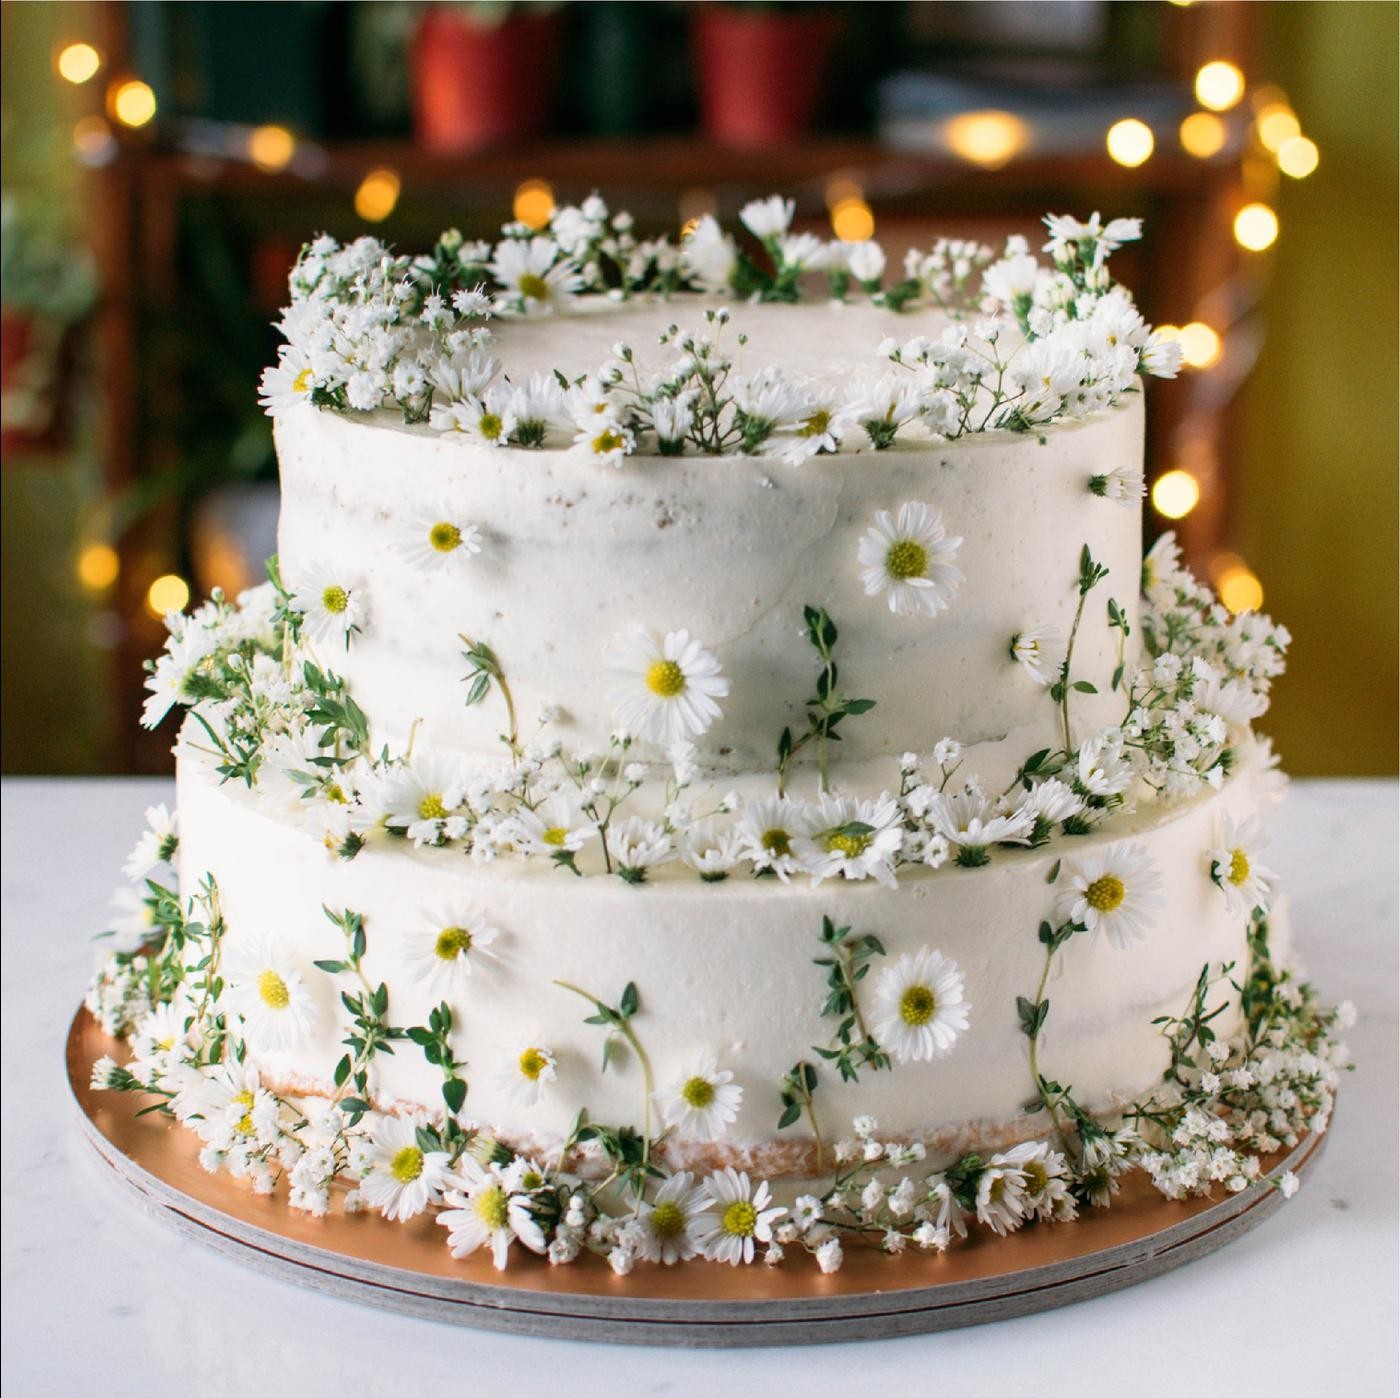 Wedding cakes: 20 beautiful and delicious ideas (Photo: reproduction / Pinterest )